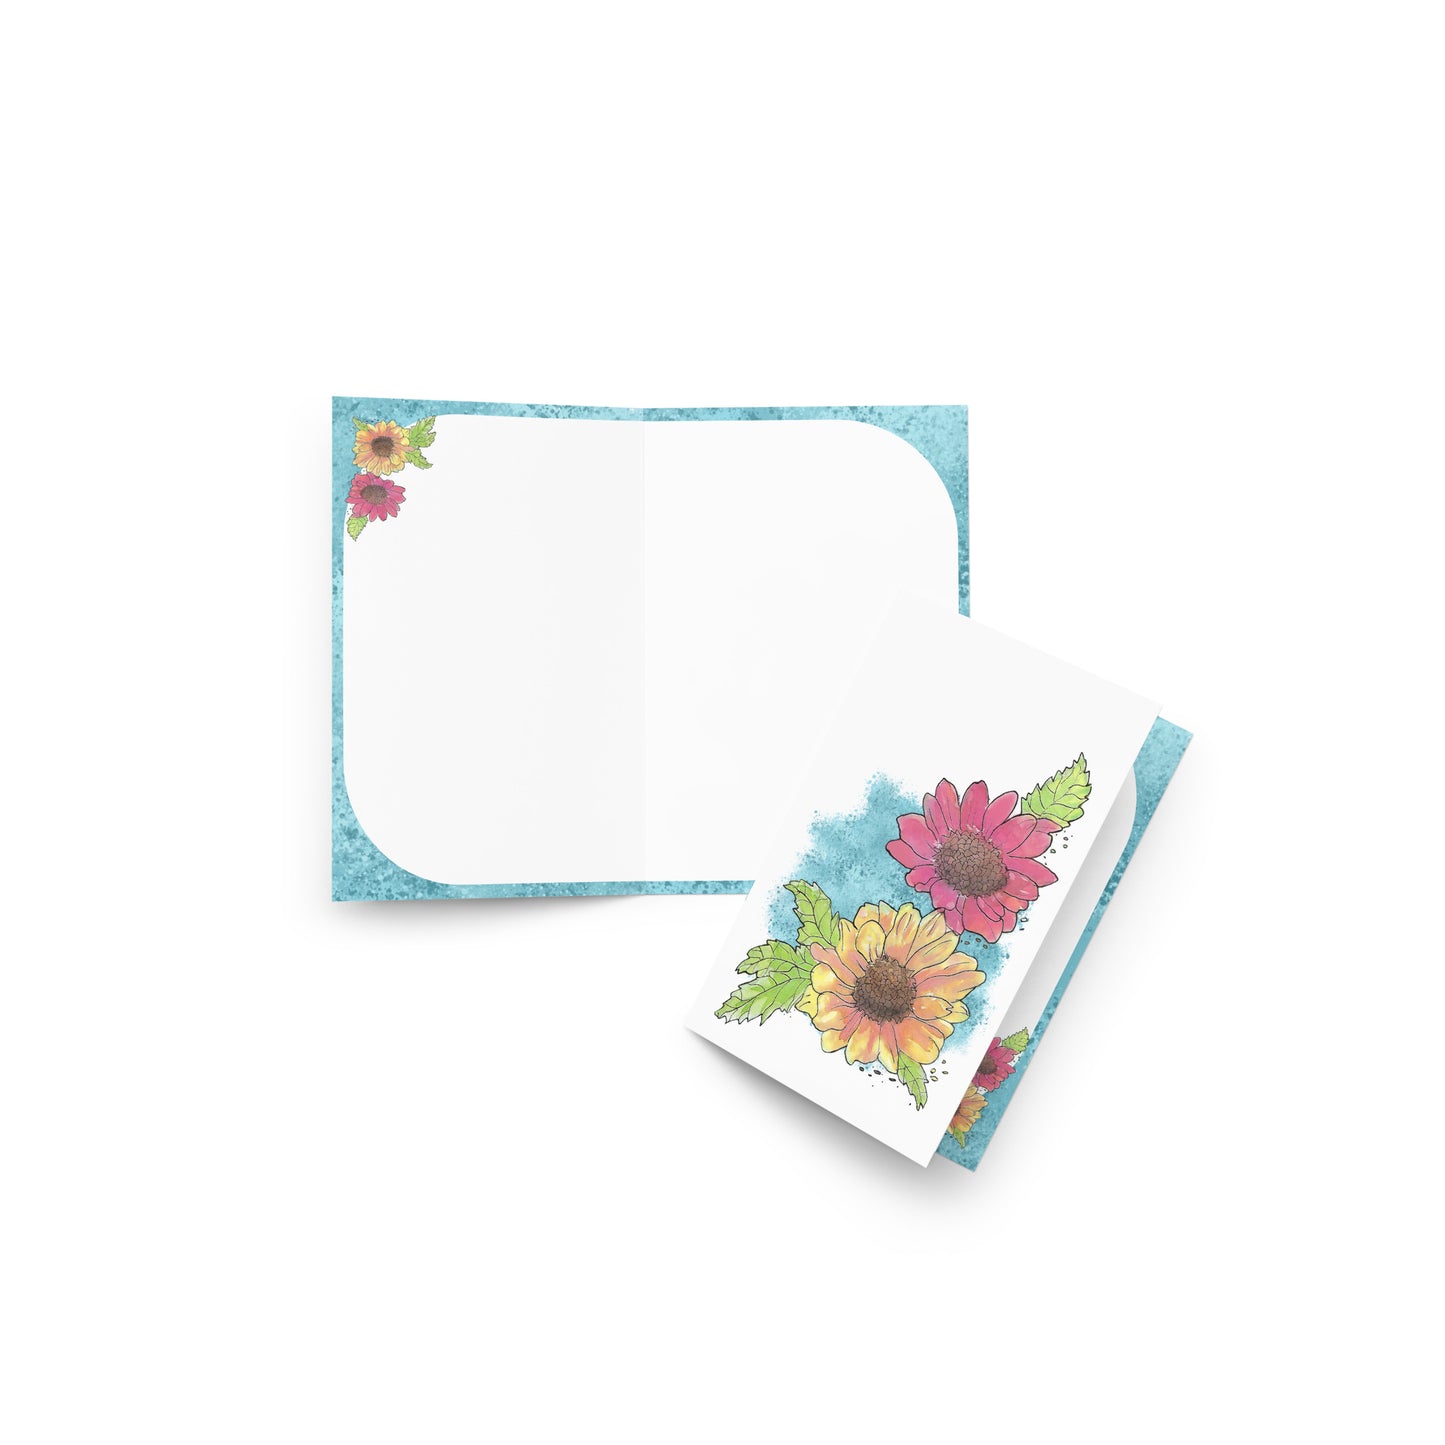 4 by 6 inch watercolor Gerber daisies set of 10 greeting cards and envelopes. Has watercolor daisies on the front. The inside has a blue watercolor border with daisy accents and room for a message. Image shows front and inside of card.